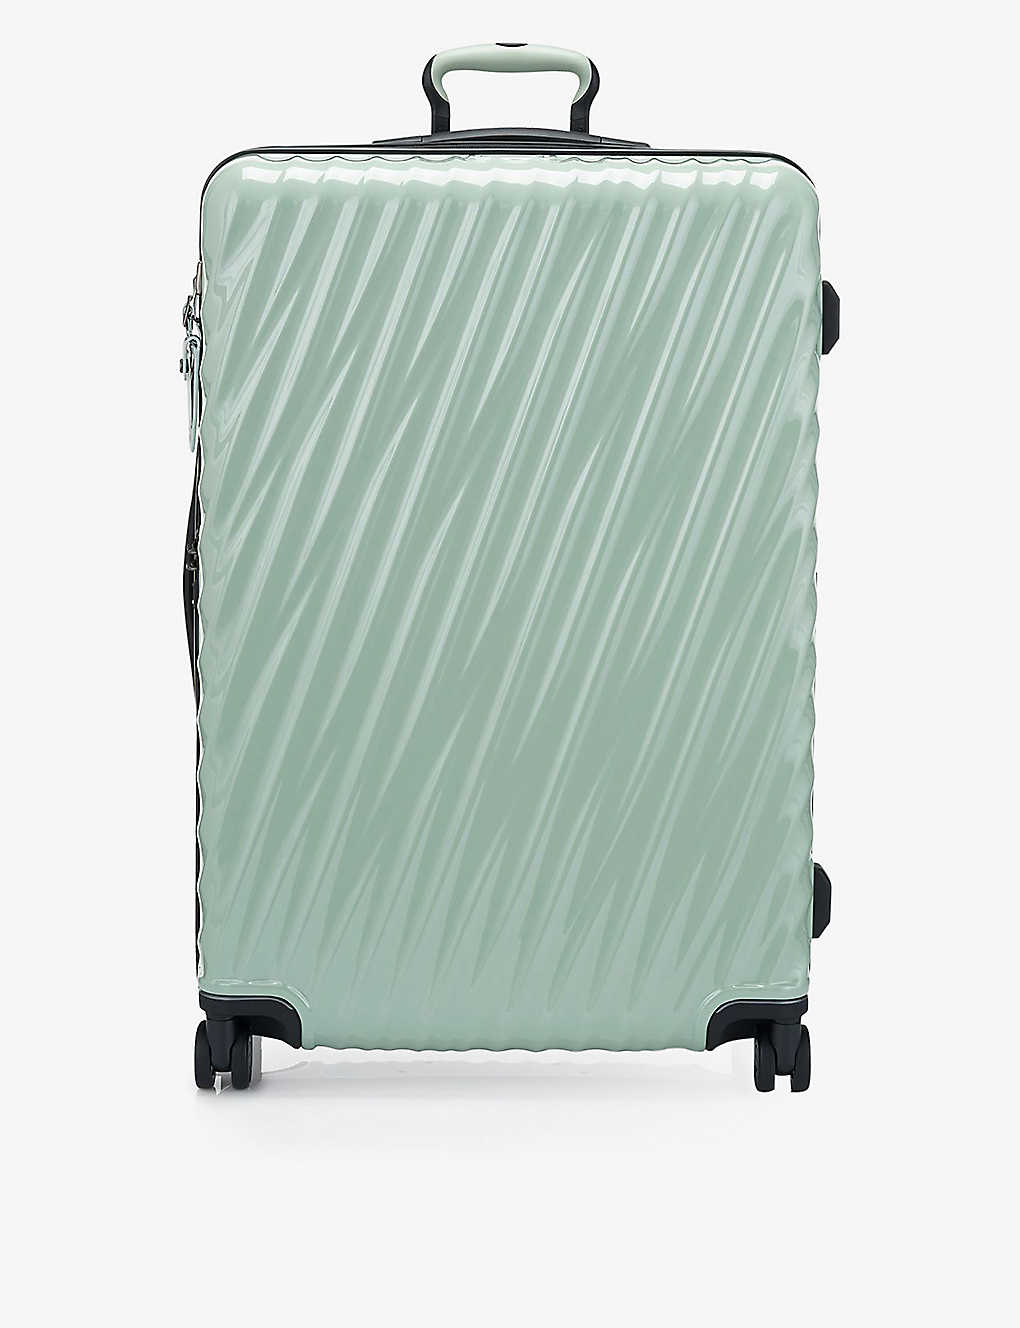 Tumi Mist Extended Trip Expandable Four-wheeled Suitcase